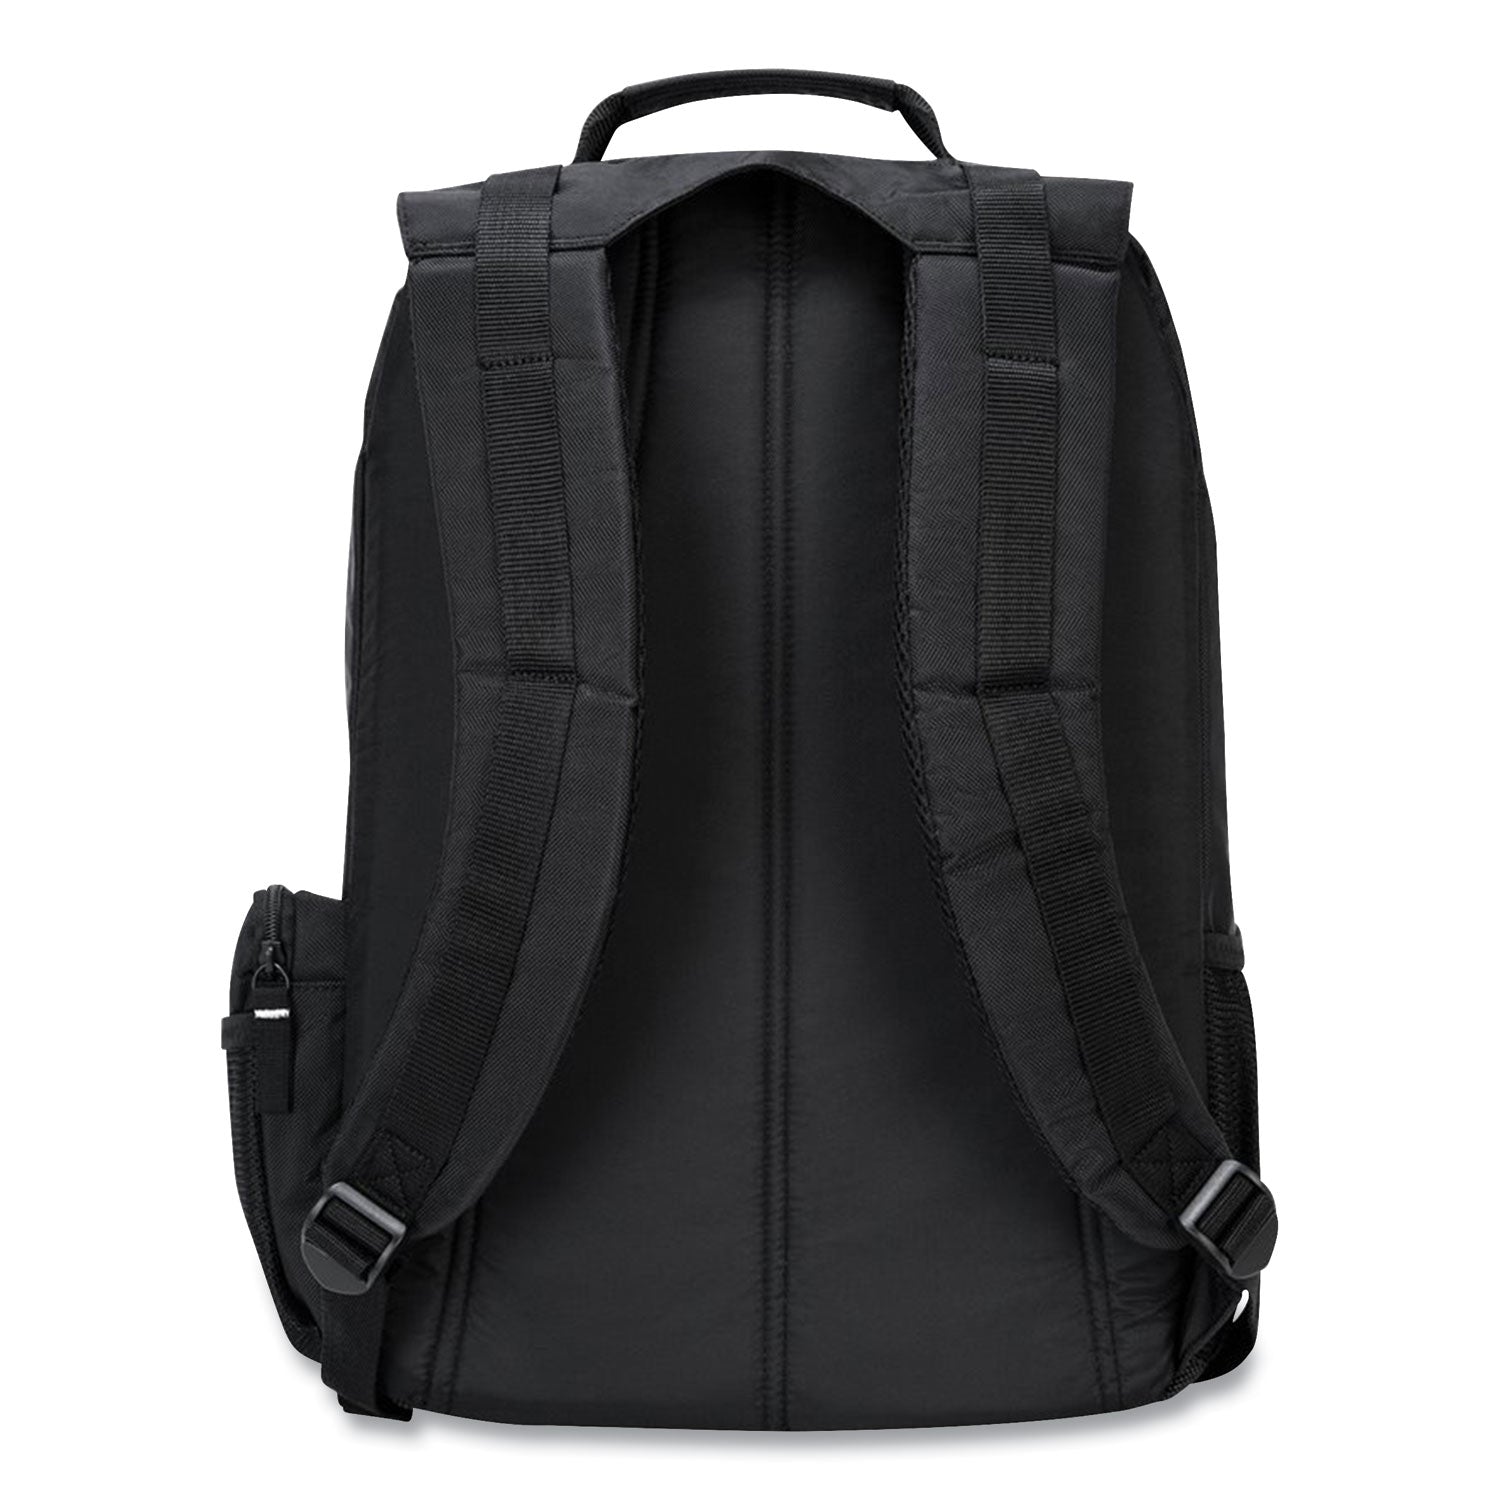 groove-laptop-backpack-fits-devices-up-to-154-nylon-pvc-15-x-7-x-18-black_trgcvr600 - 5